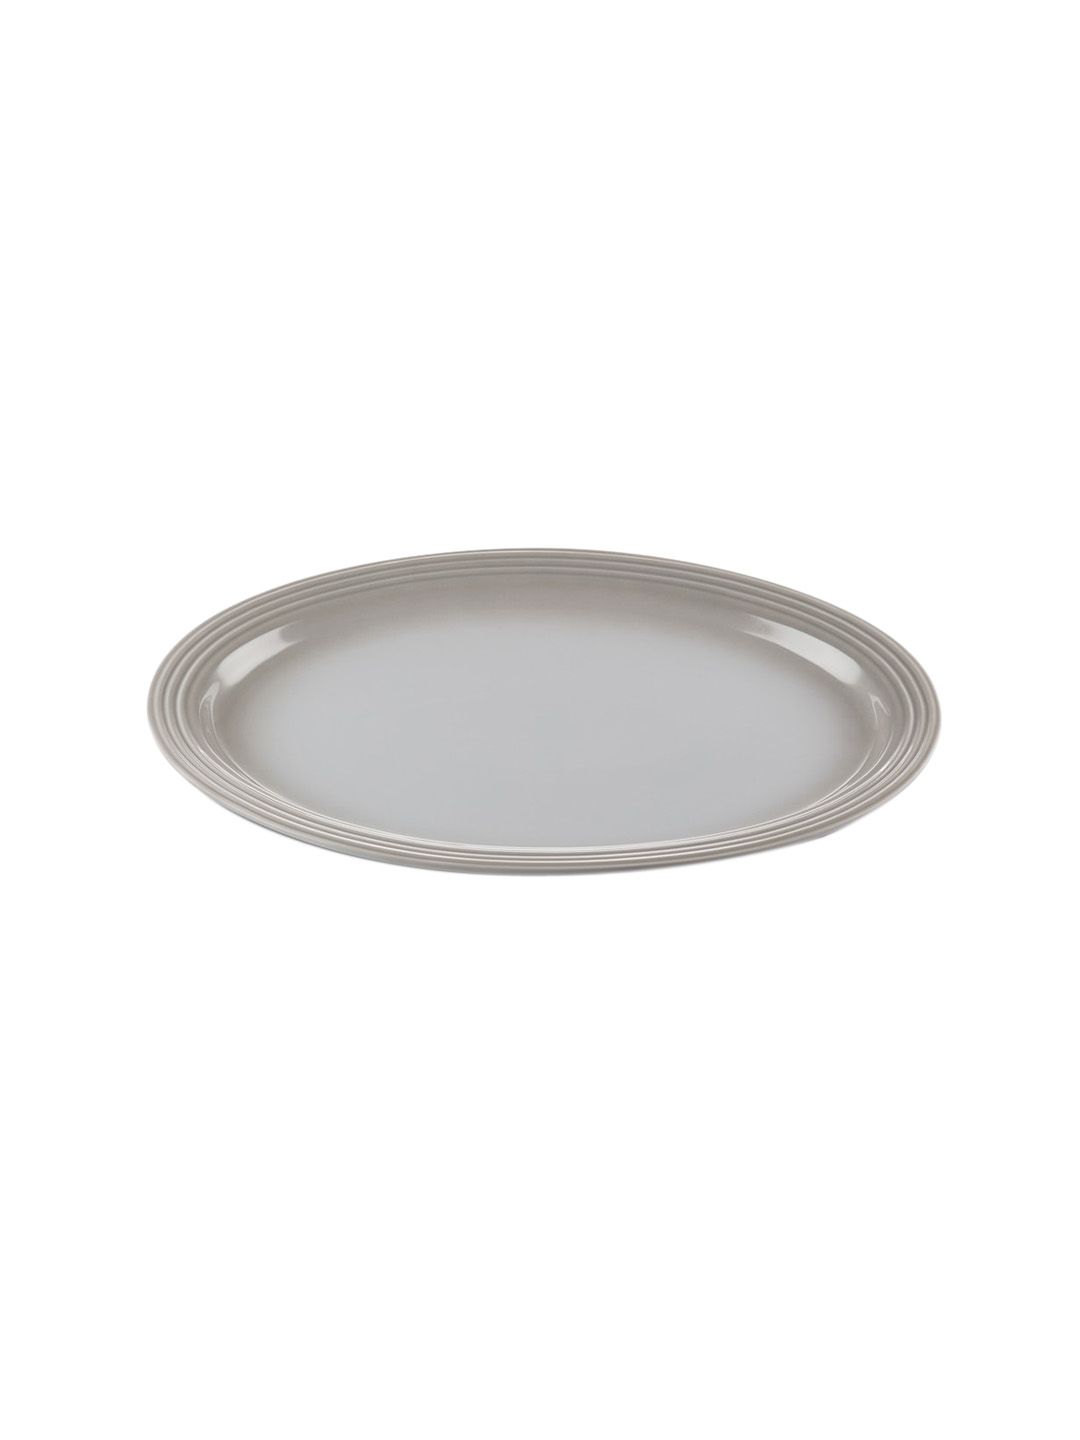 LE CREUSET Grey Stoneware Food Platter Price in India